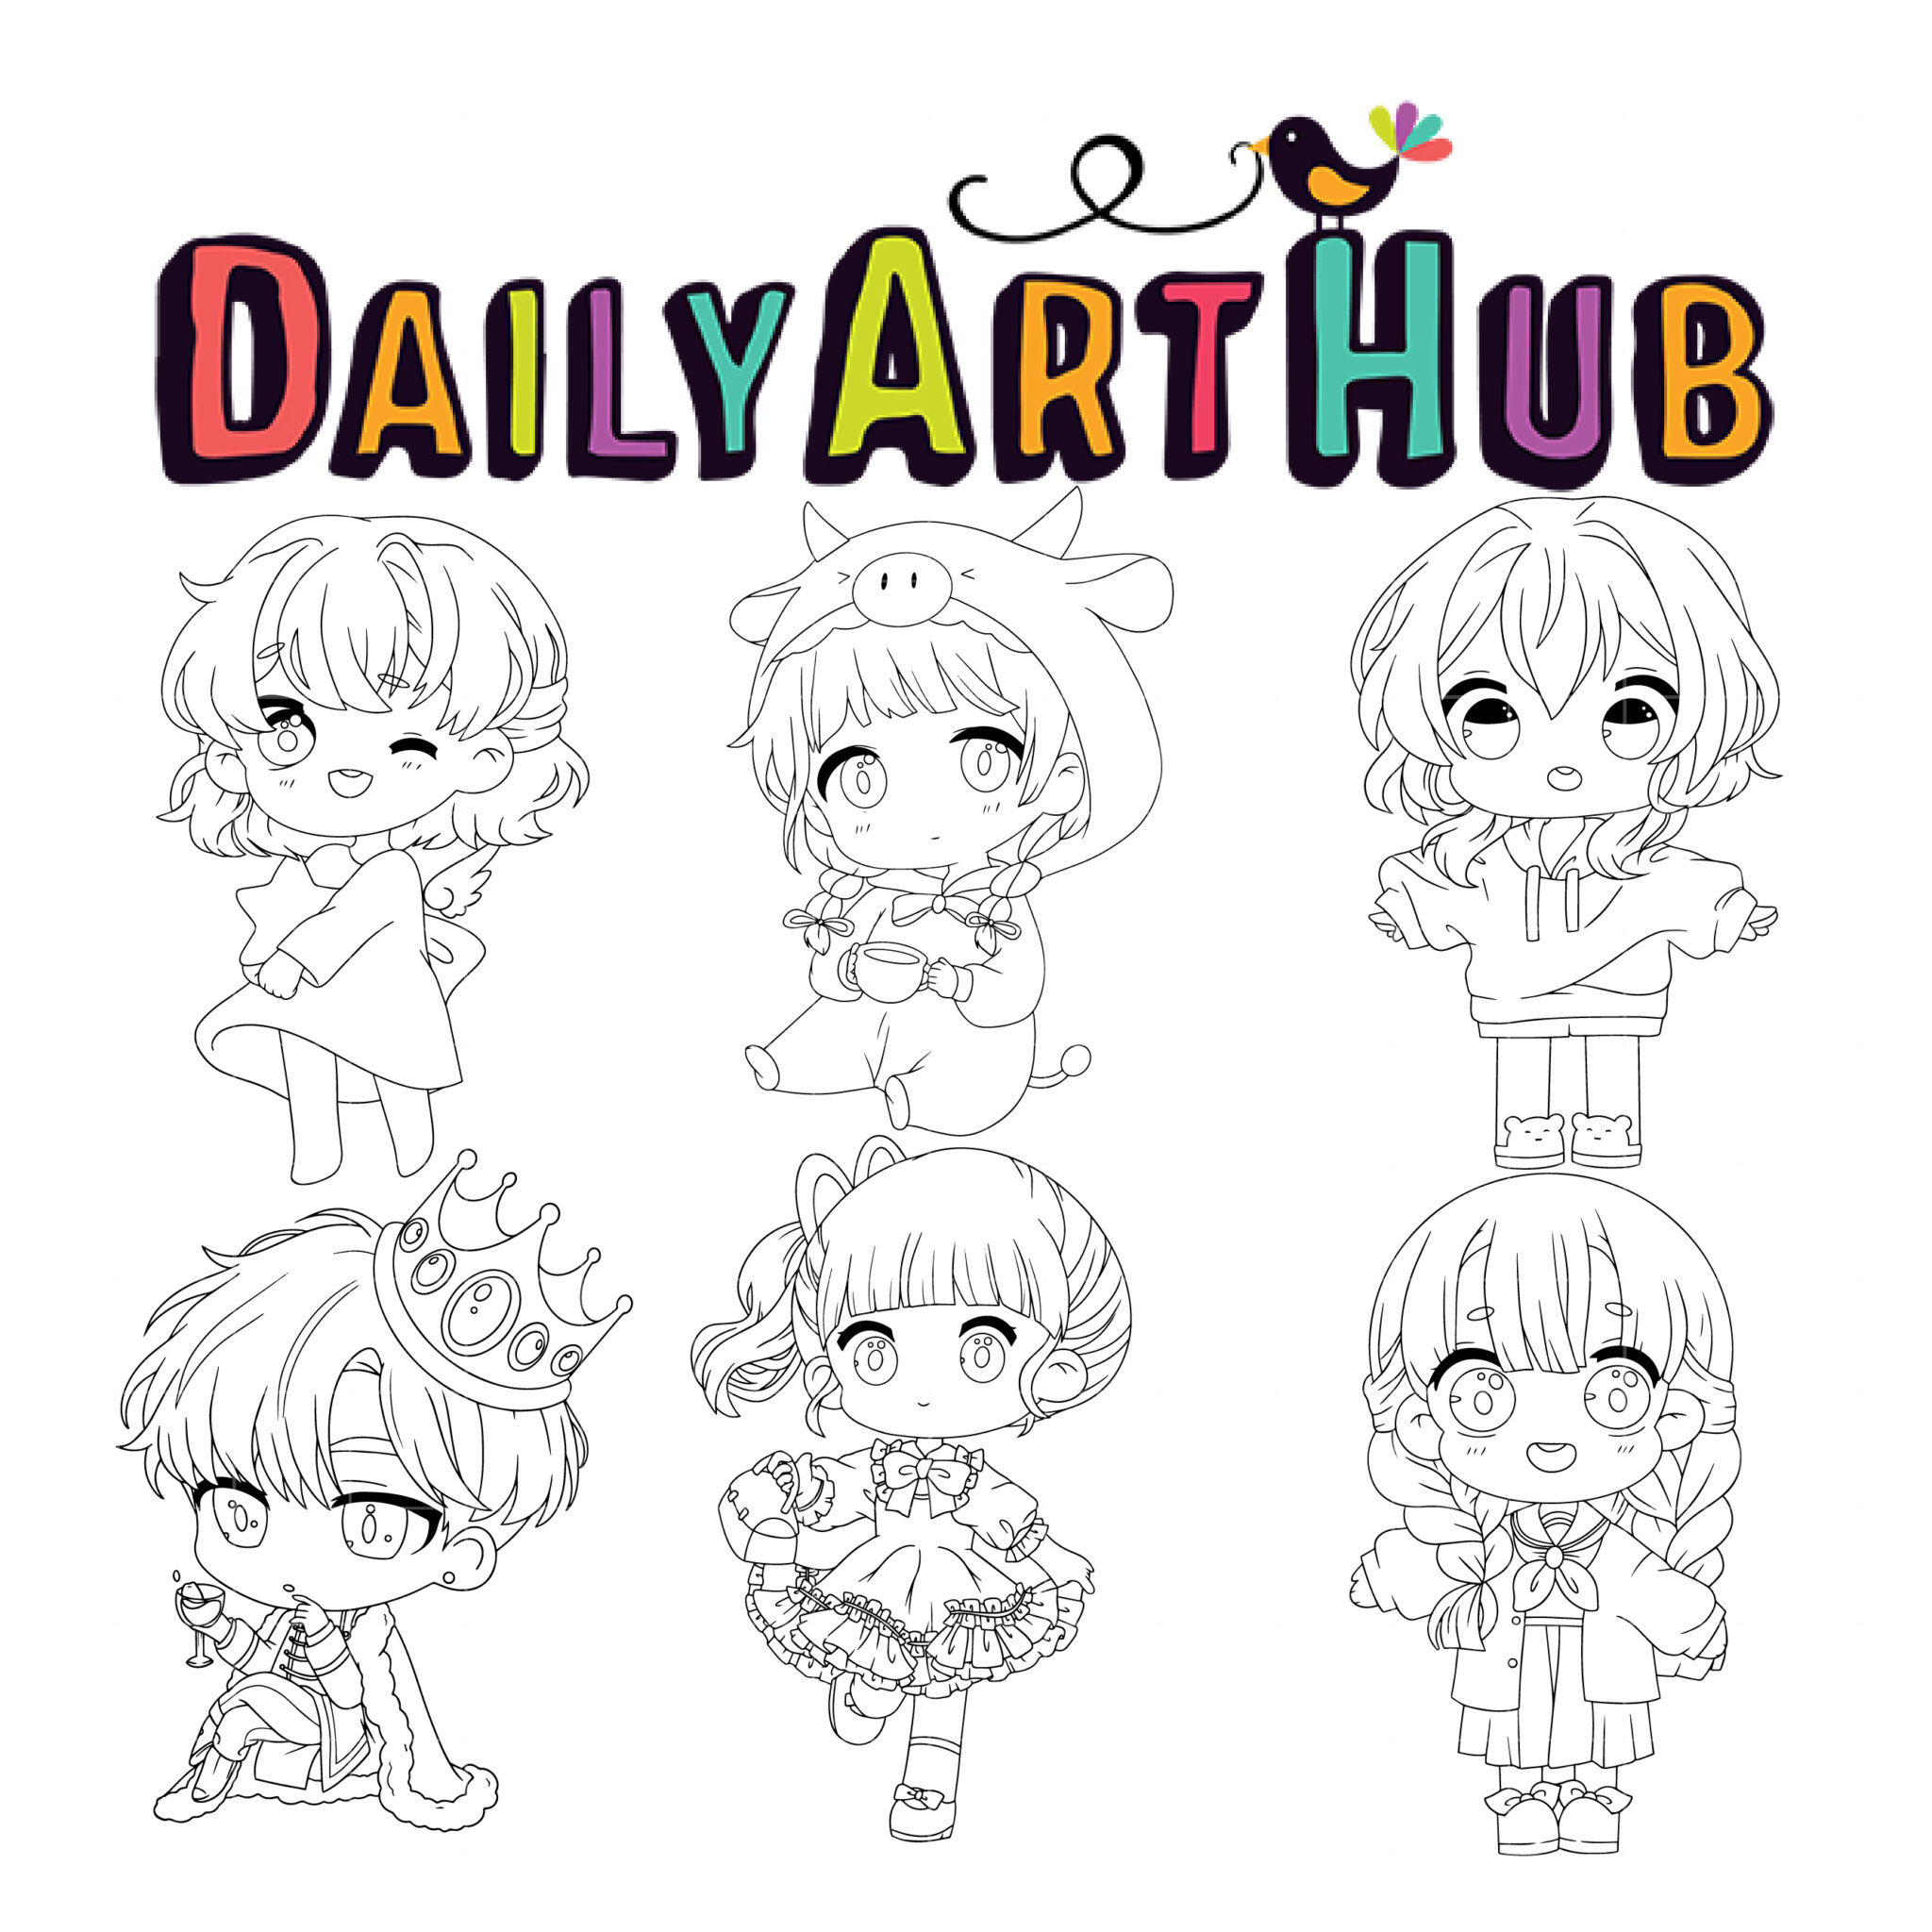 https://www.dailyarthub.com/wp-content/uploads/2021/07/Chibi-Anime-Outline-for-Coloring-scaled.jpg